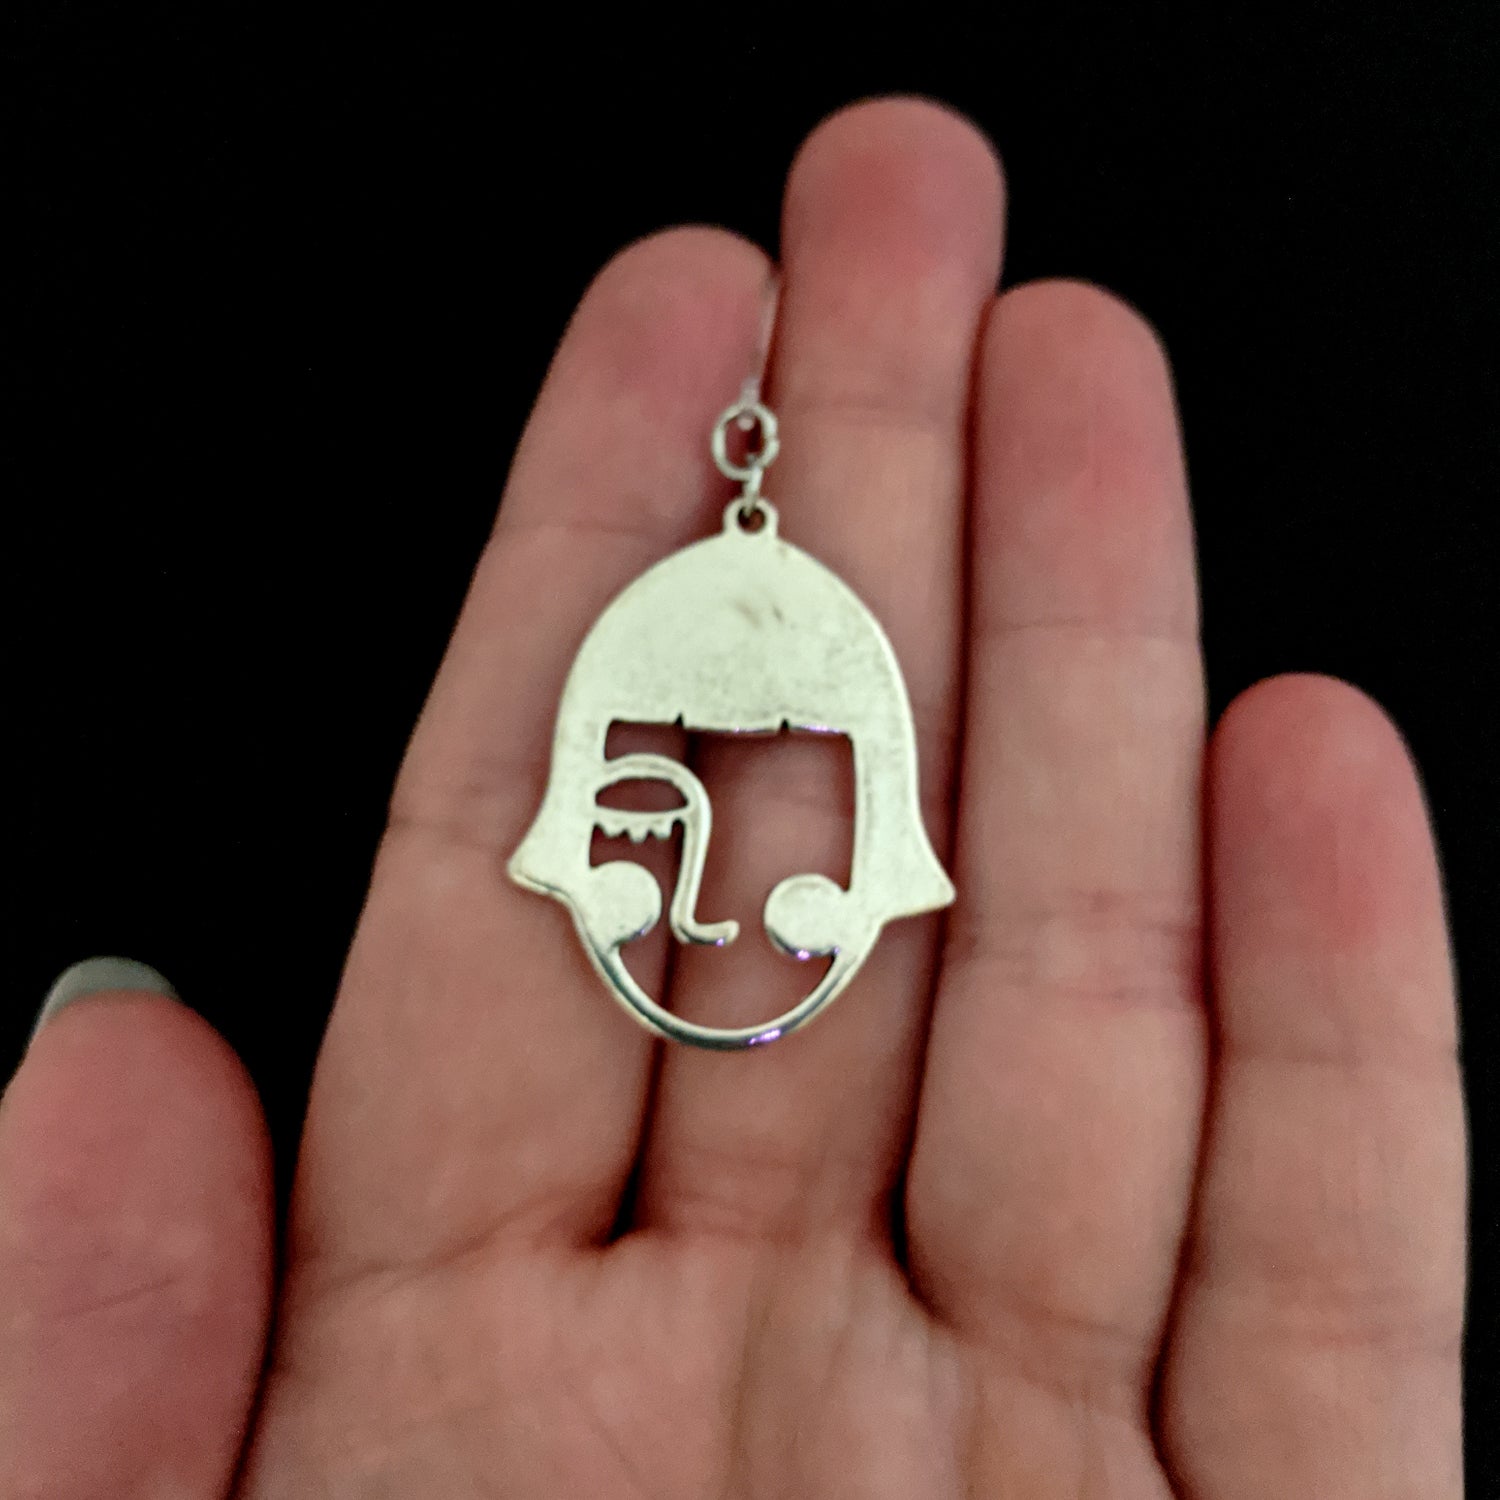 Picasso Earrings (Dangles) - size comparison hand